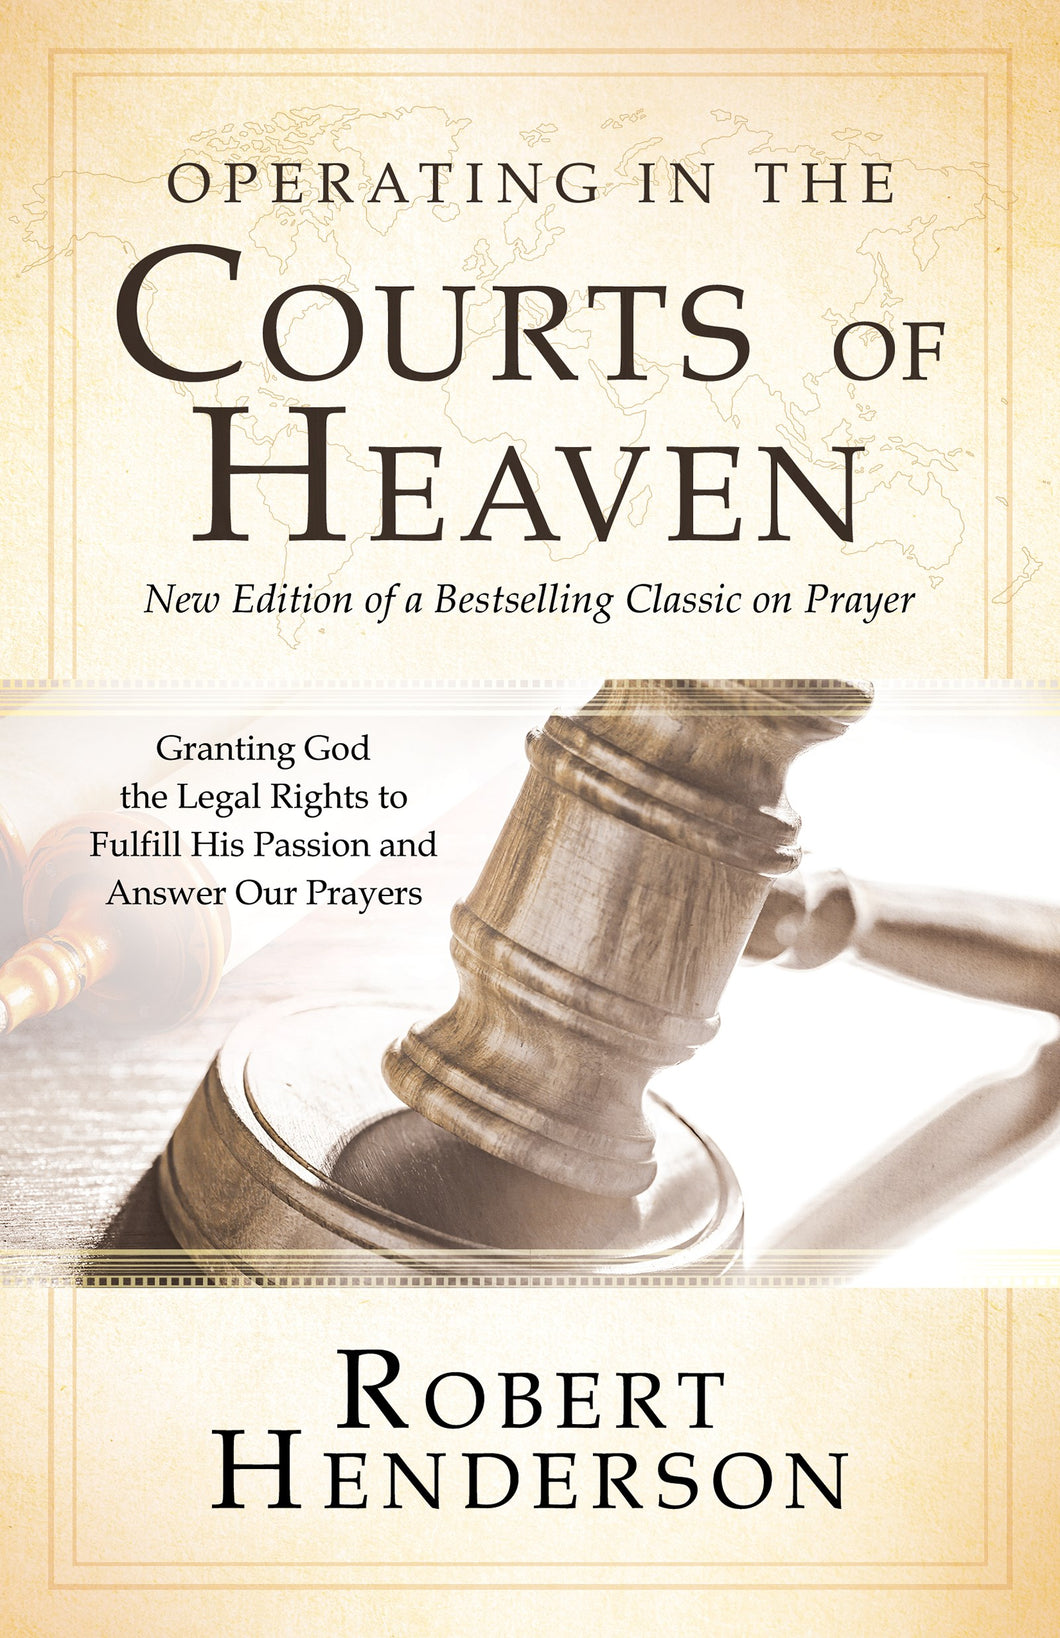 Operating in the Courts of Heaven (Expanded Edition Featuring All New Content)